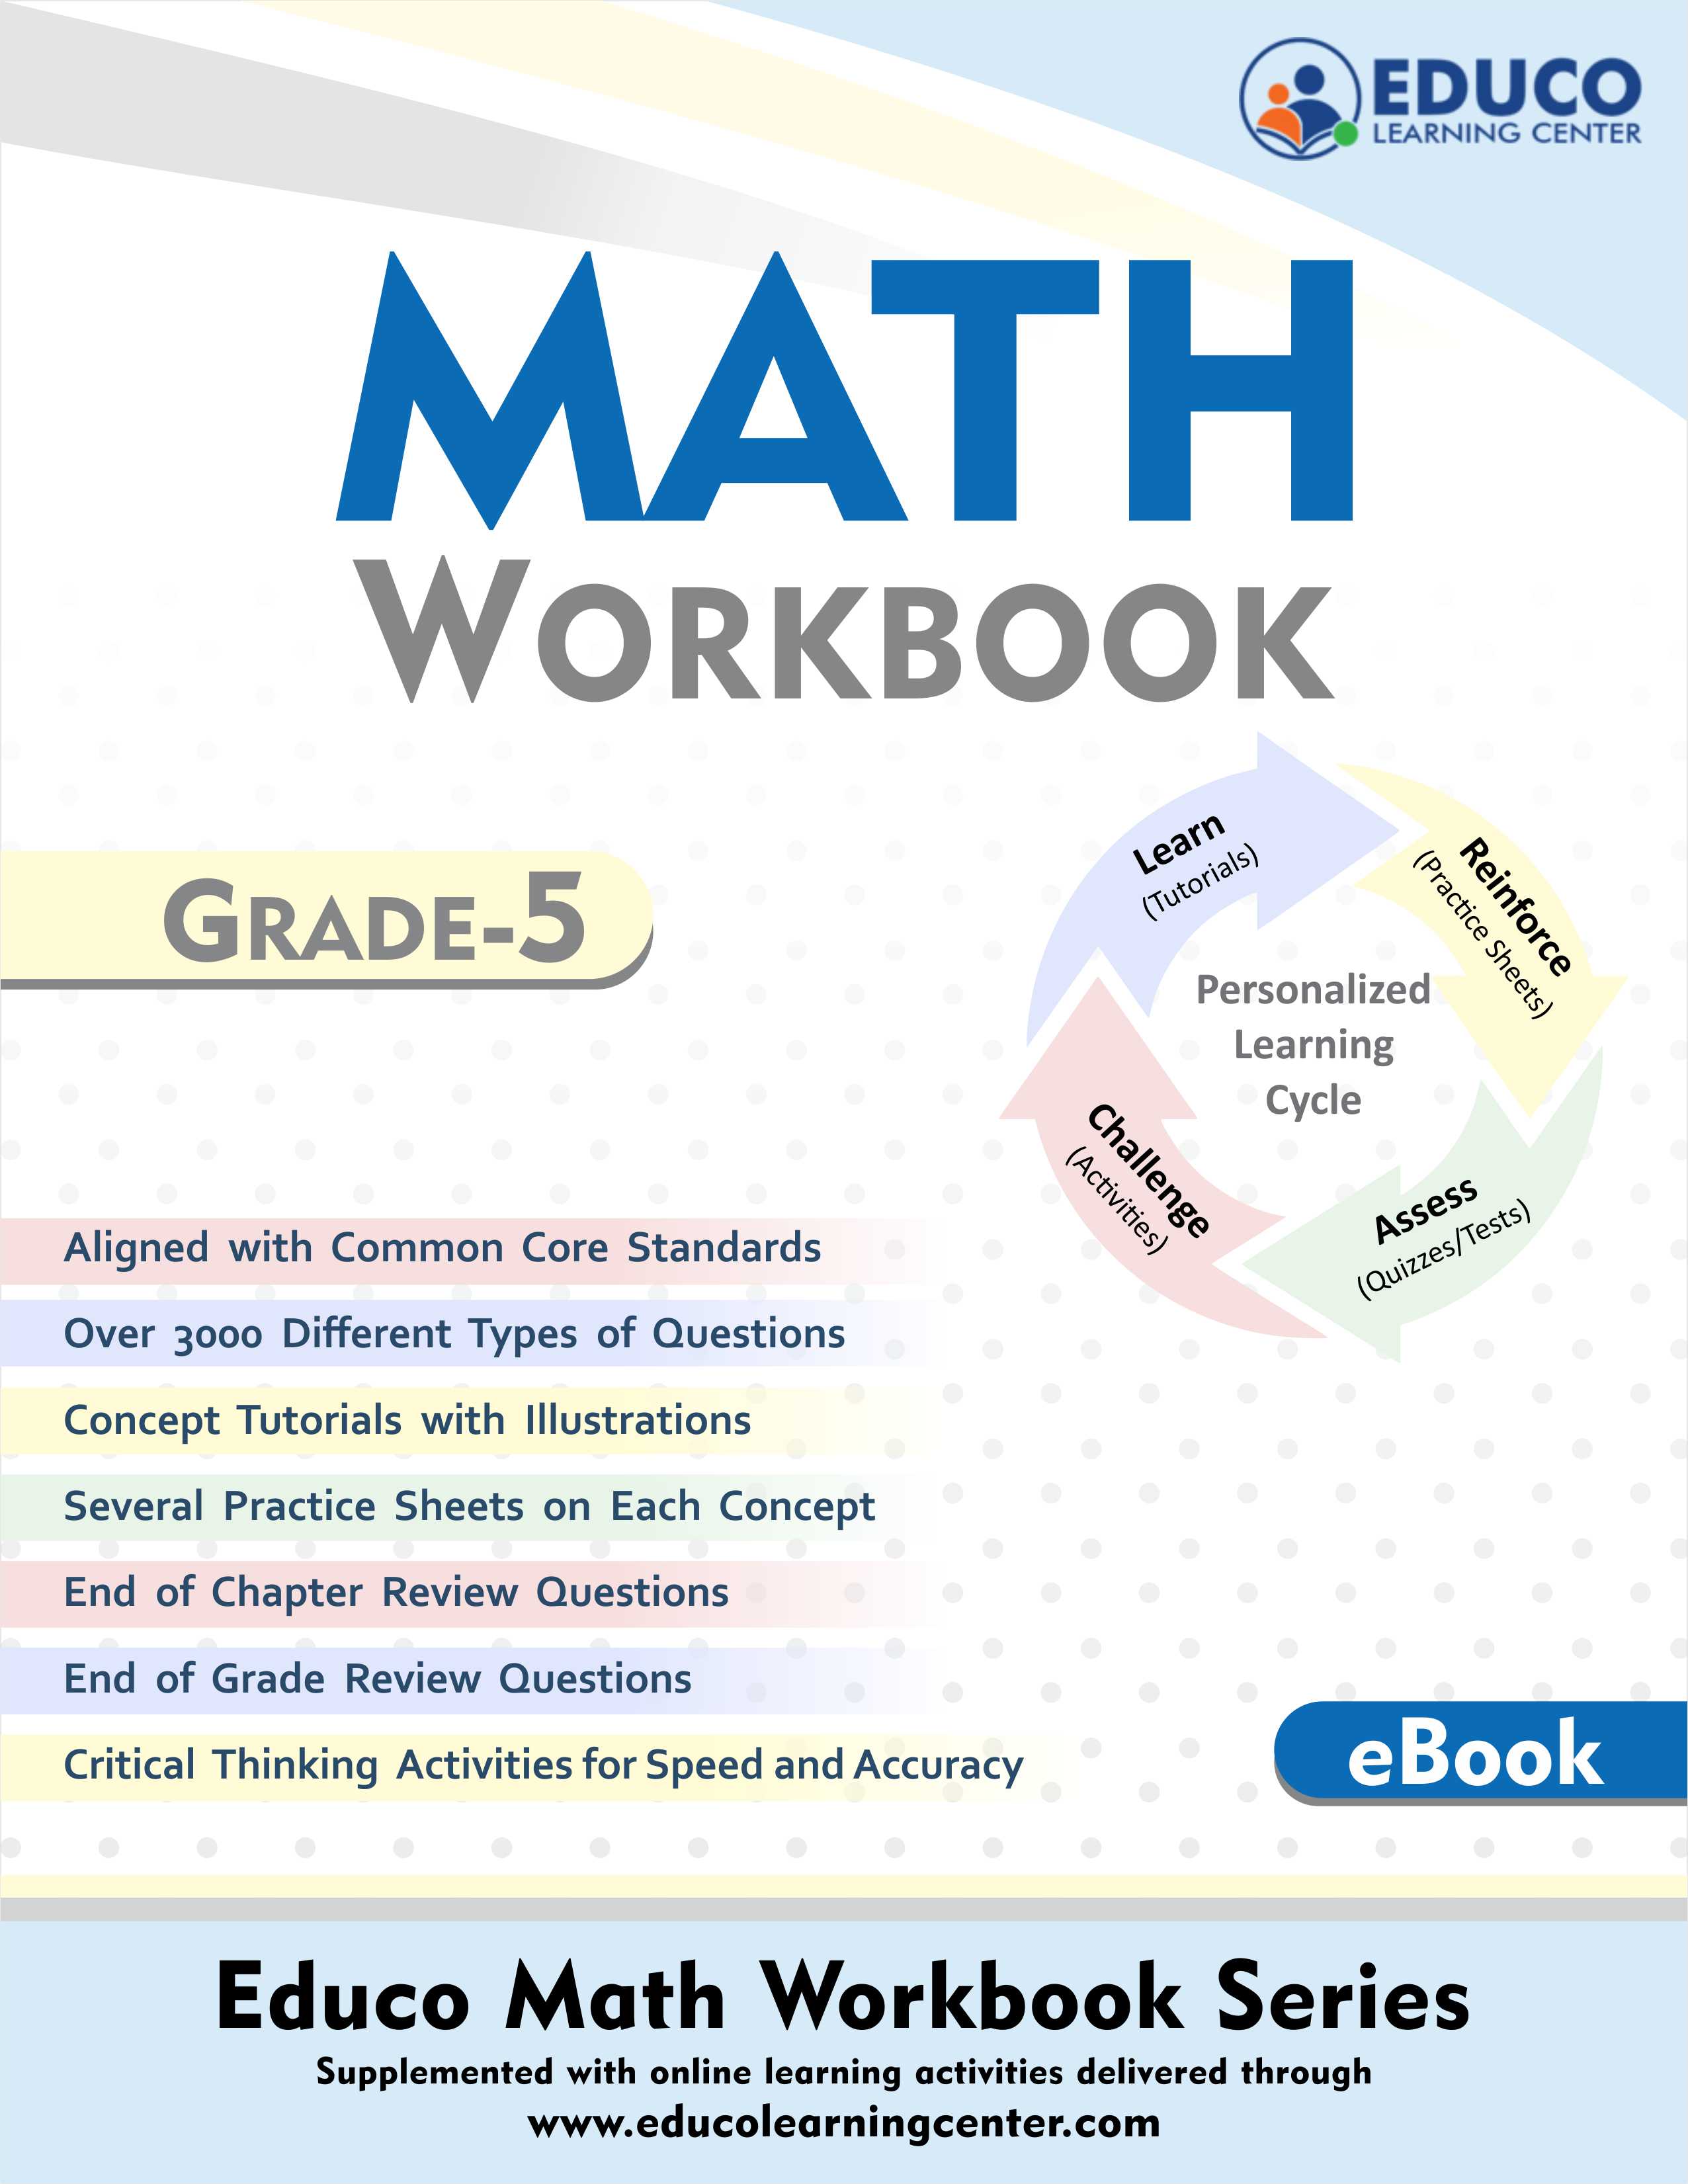 Grade 5 Math Printable Workbook including over 3000 Different types of Math Questions